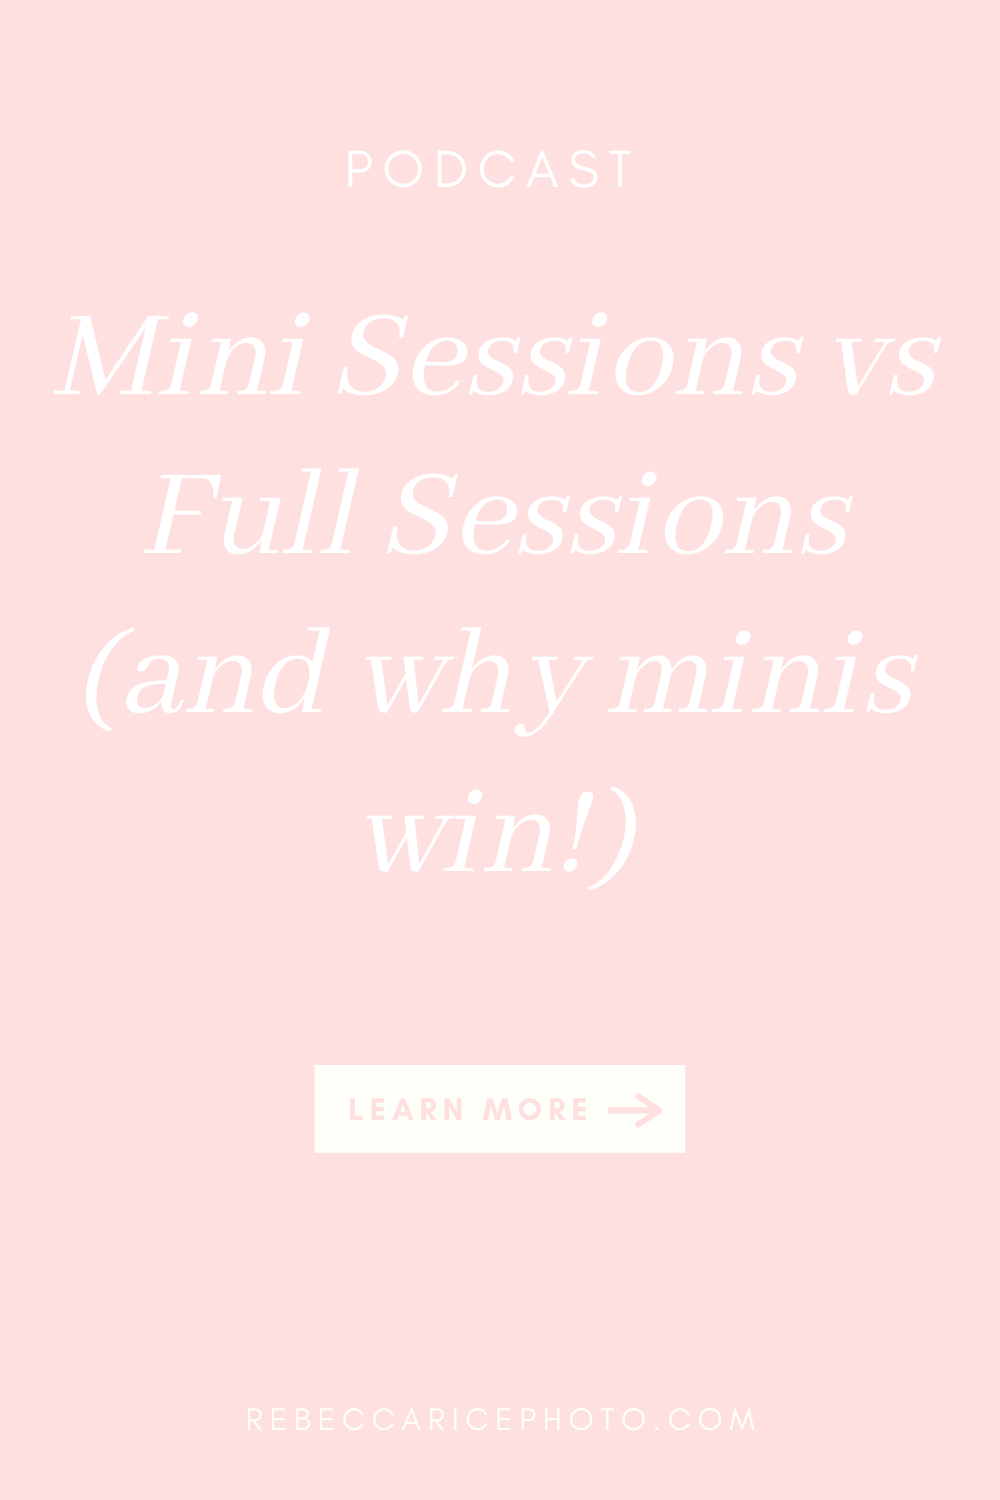 mini-sessions vs. full sessions and why mini sessions win